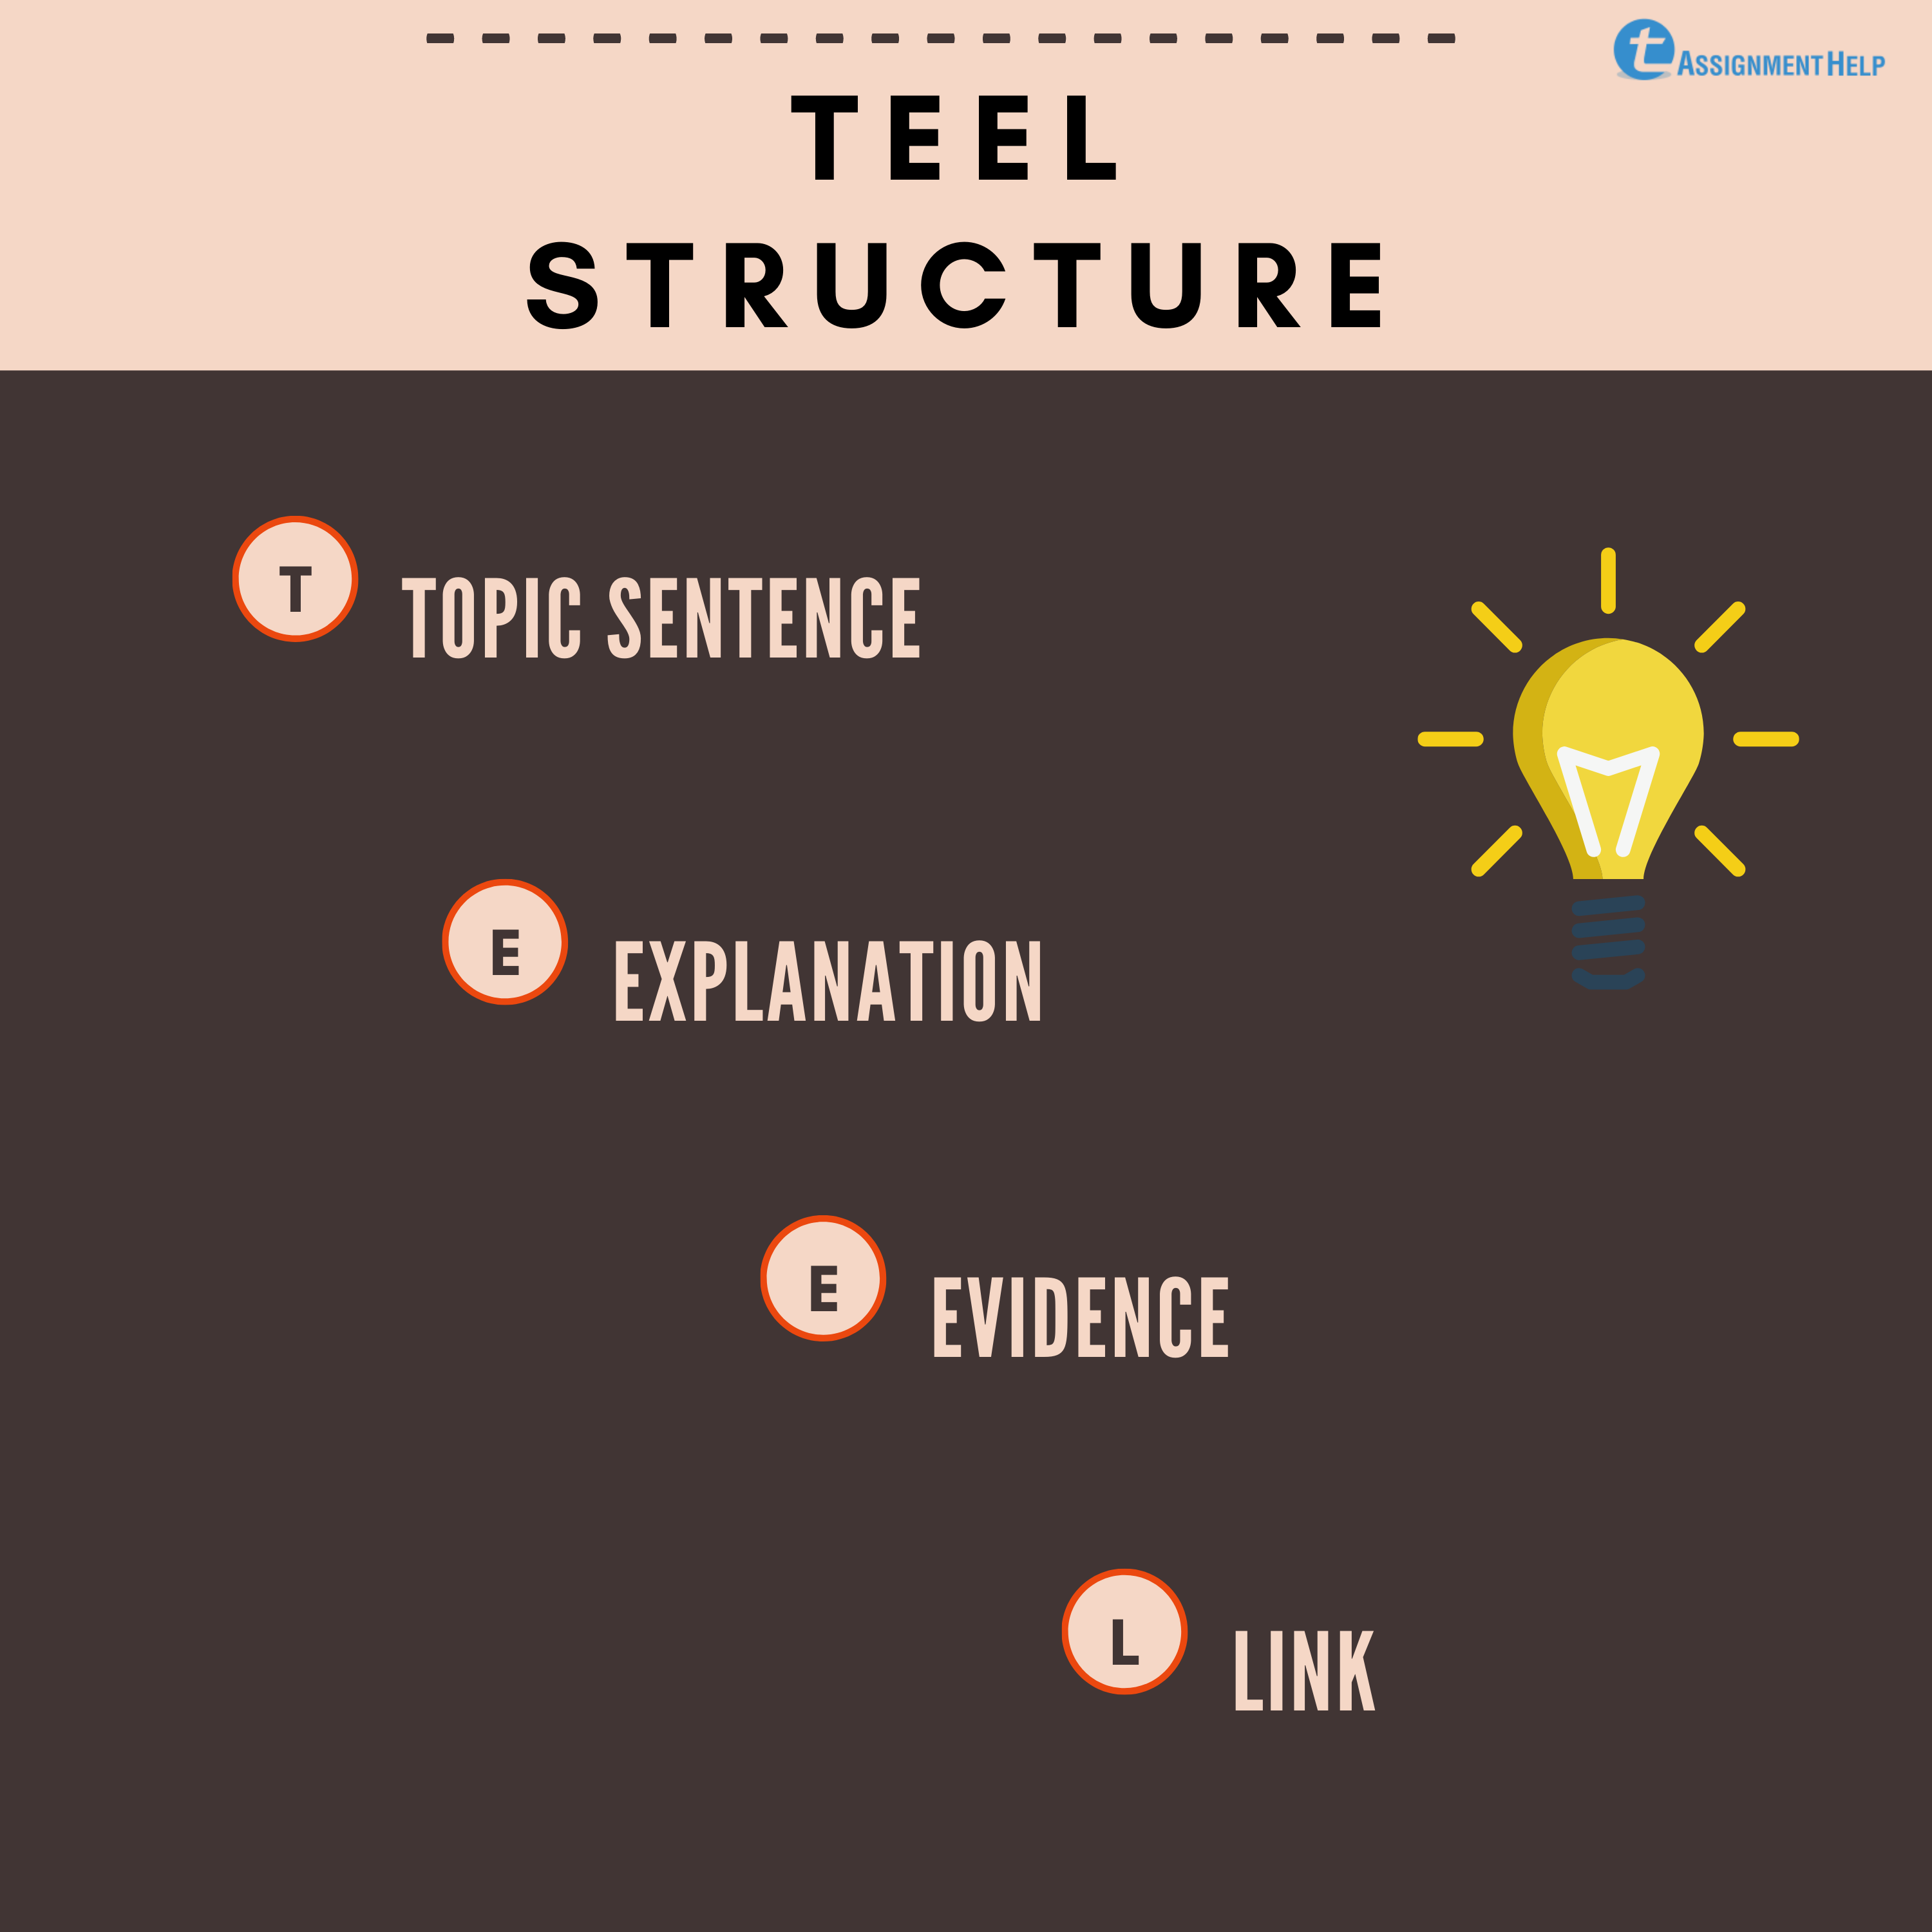 how to write an introduction for a teel essay